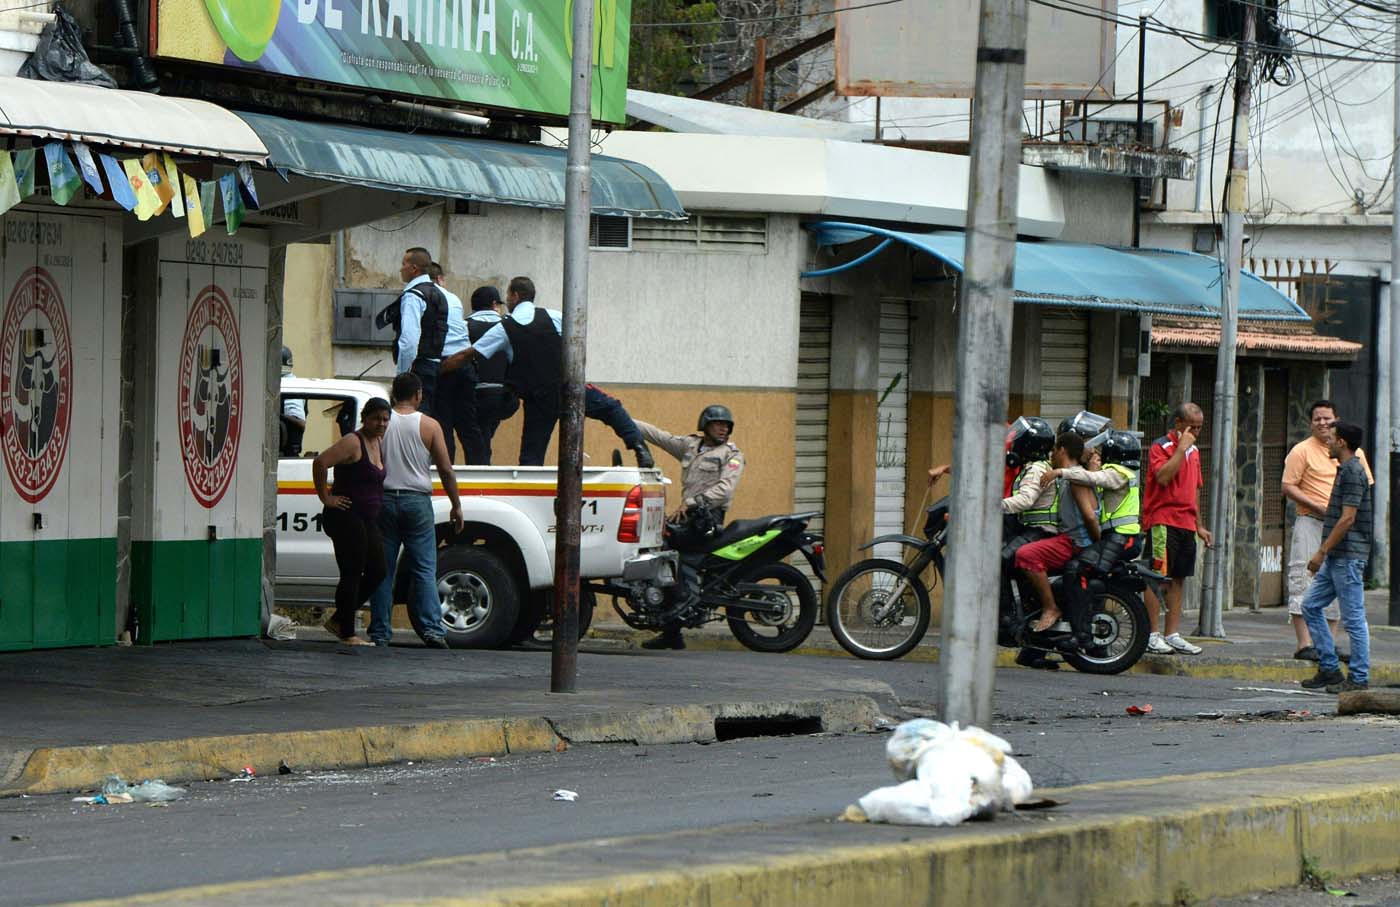 EDITORS NOTE: Graphic content / Police take a man into custody (on the motorcycle) during lootings in Maracay, Venezuela on June 27, 2017. / AFP PHOTO / Federico Parra / GRAPHIC CONTENT